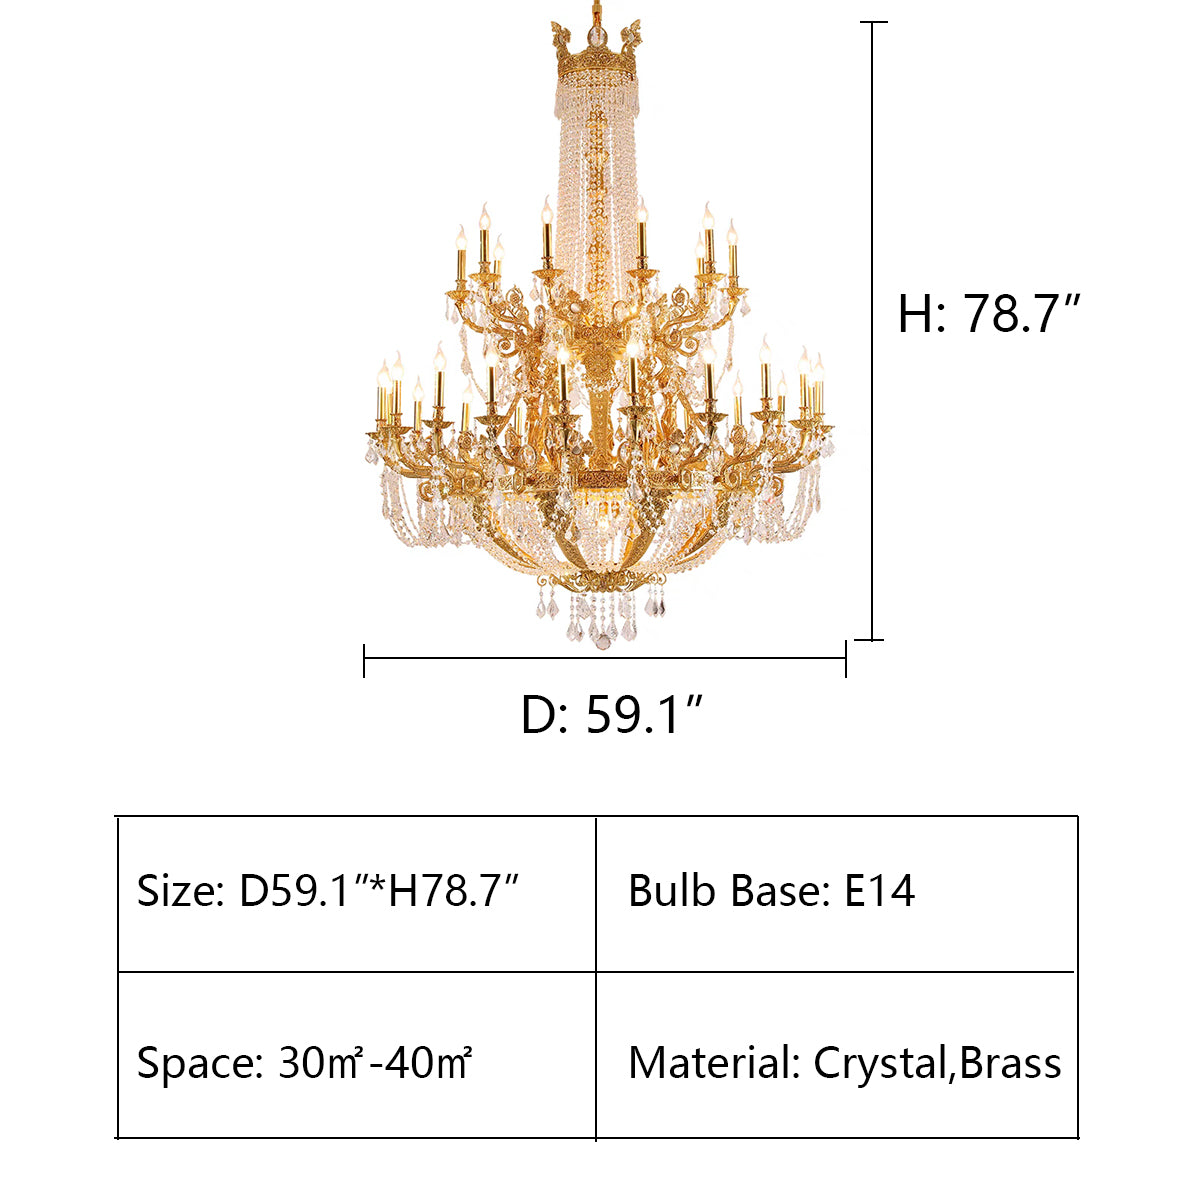 D59.1"*H78.7" chandelier,chandeliers,pendant,crystal,metal,clear crystal,candle,branch,round,raindrop,teardrop,extra large,oversized,large,huge,big,round,living room,luxury,dining room,modern,foyer,stairs,hallway,entrys,hotel lobby,duplex hall,loft,gold,brass,copper